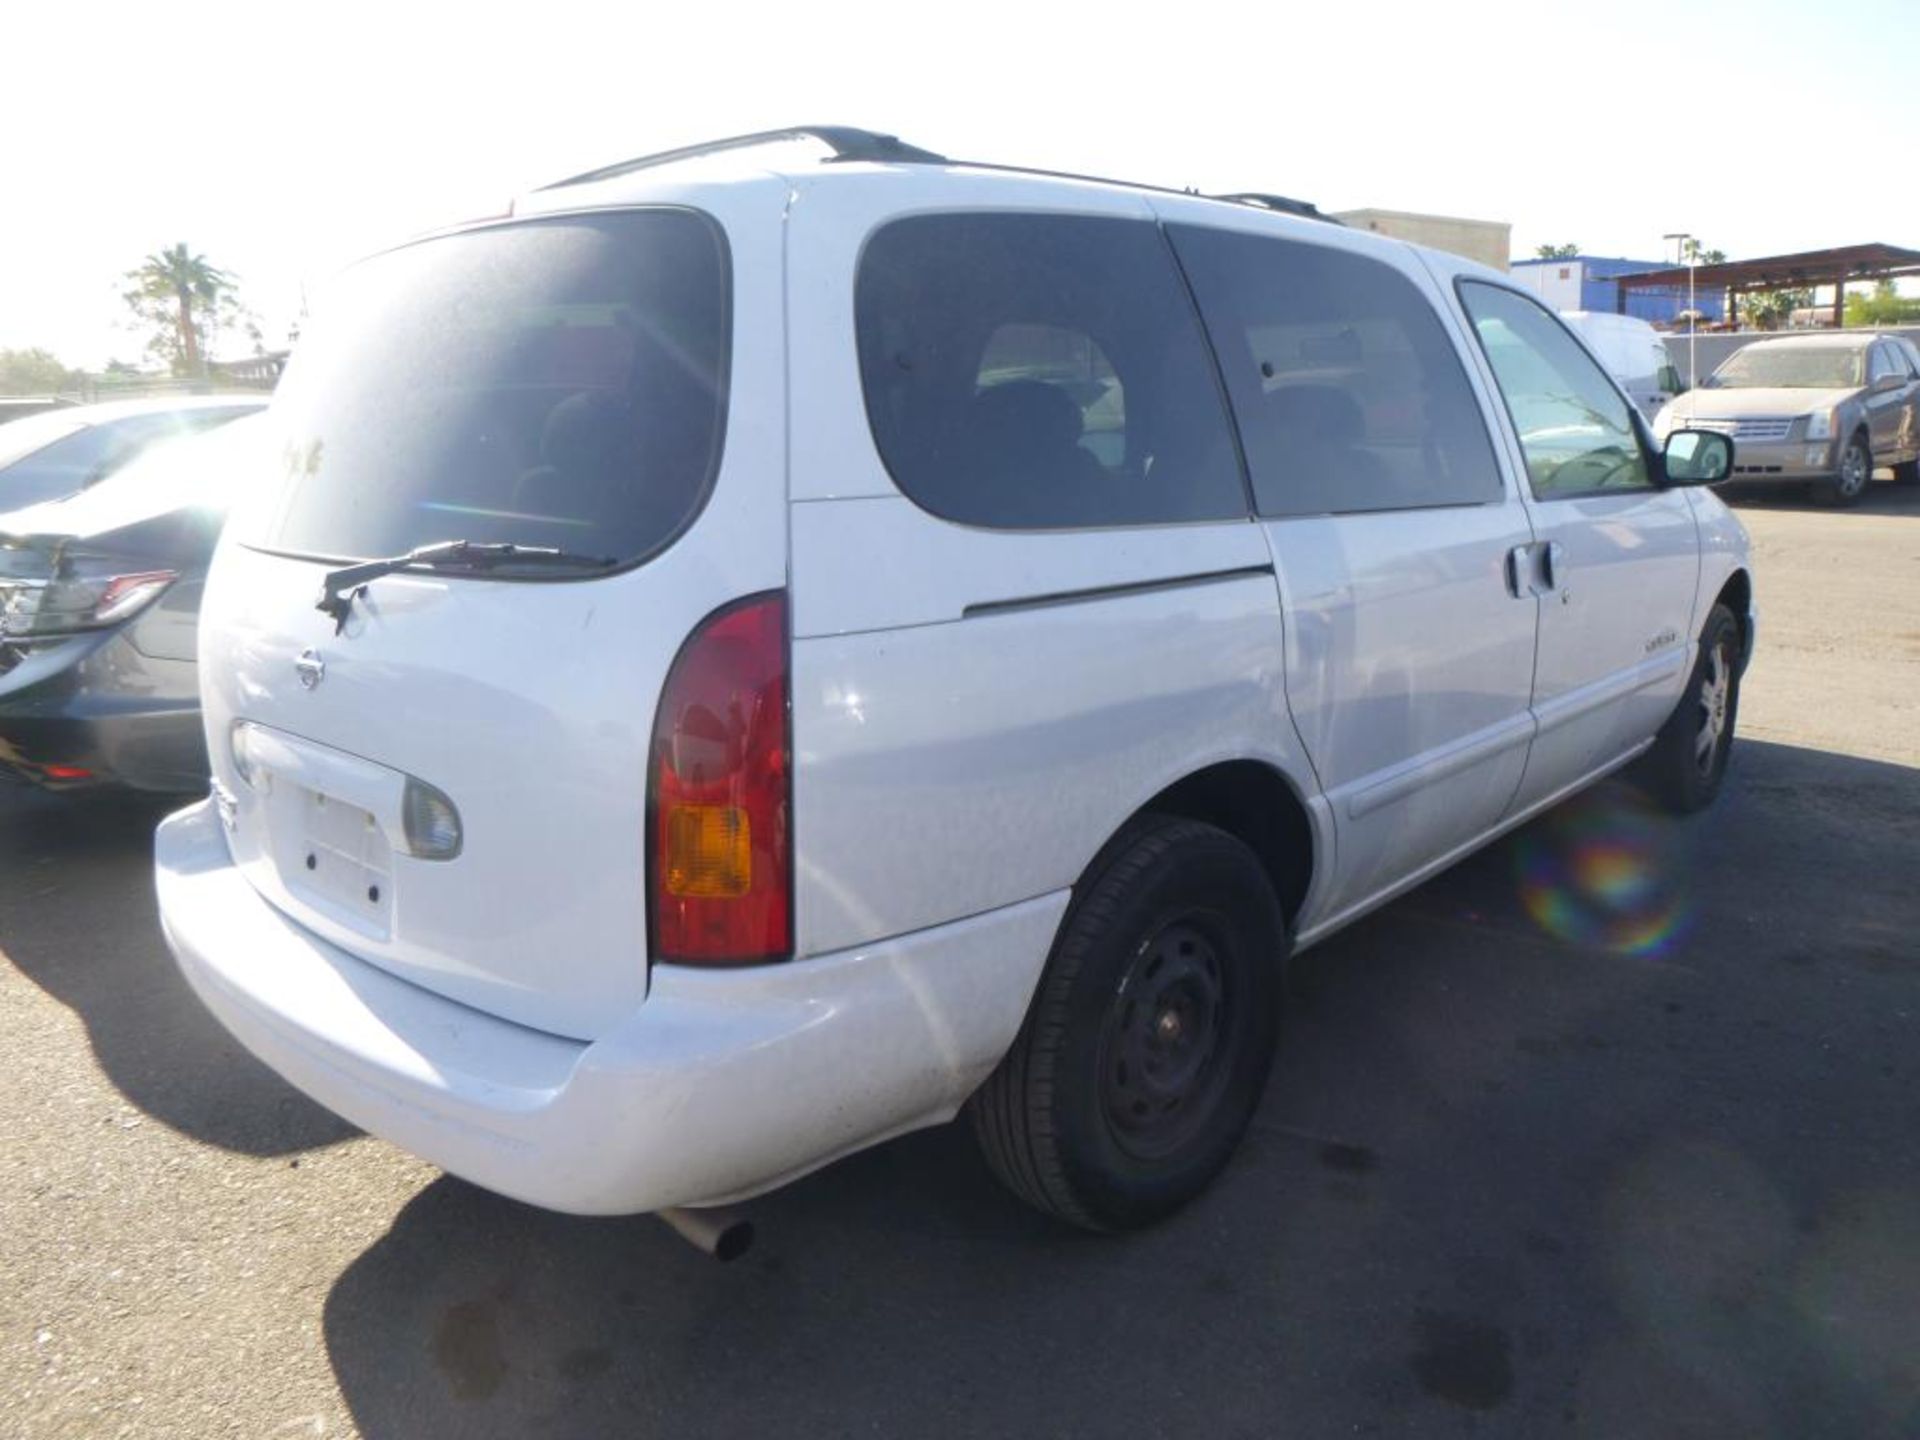 1999 Nissan Quest - Image 3 of 16